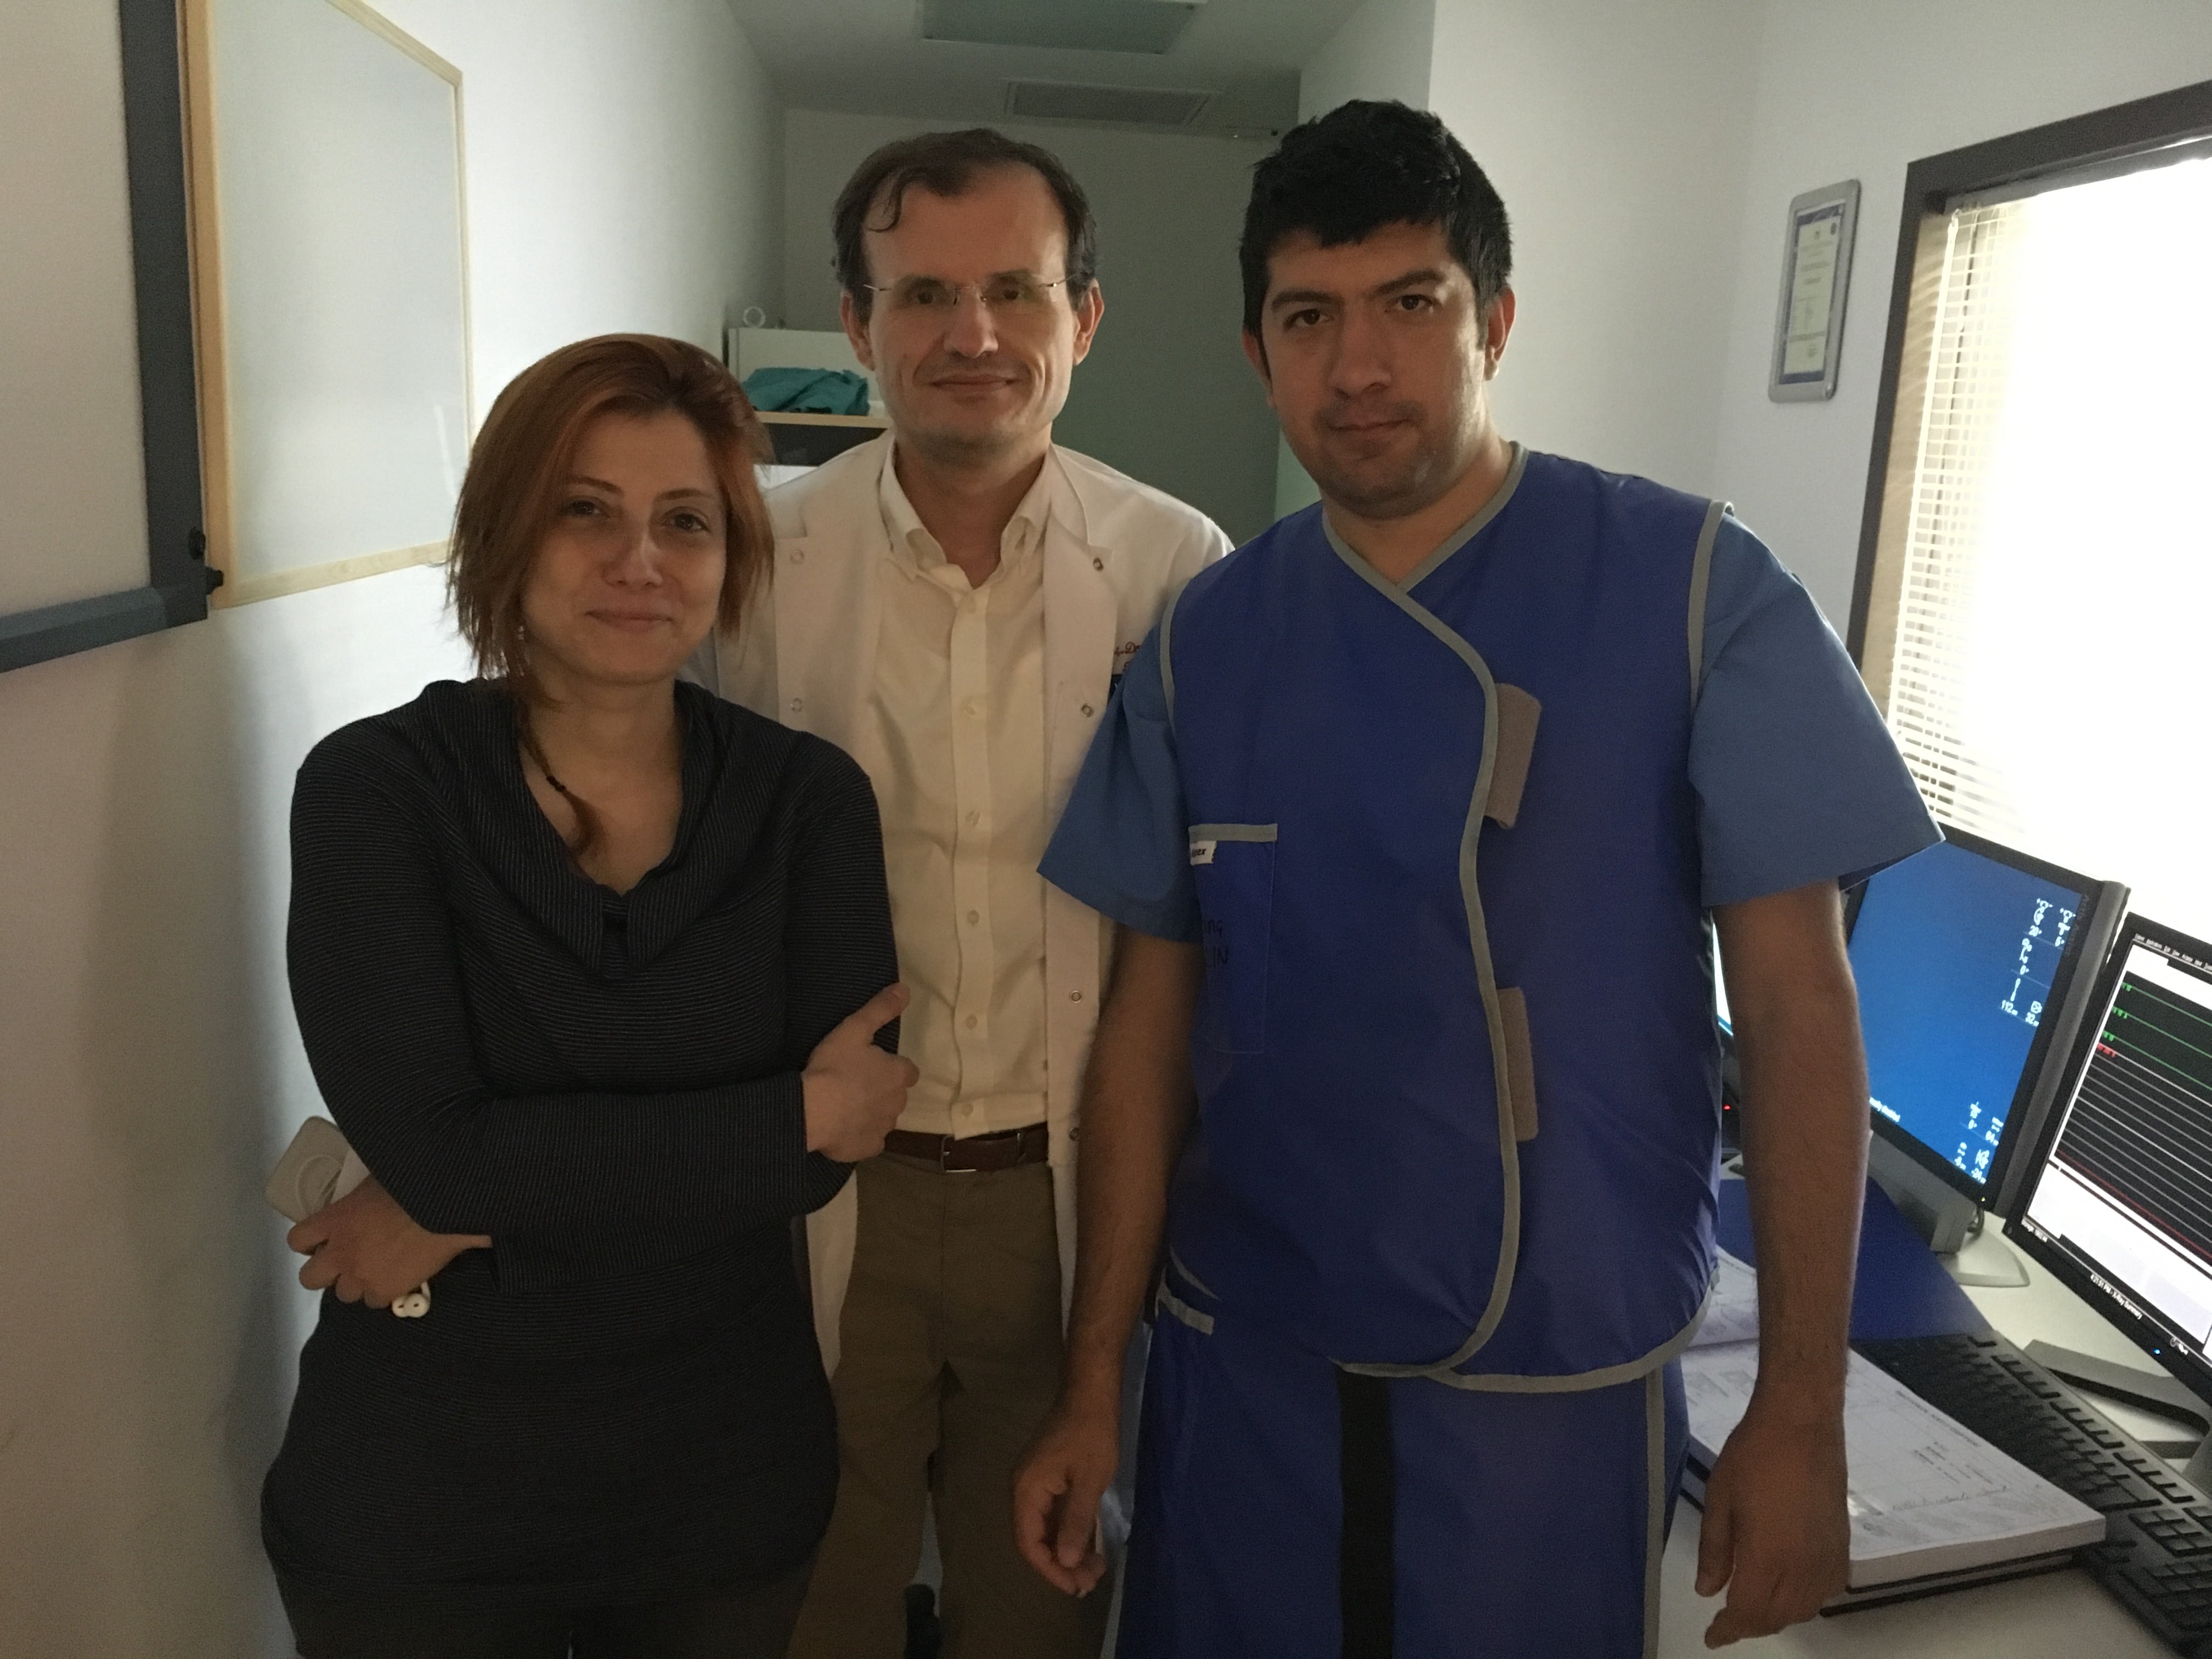 Bayrampaşa Kolan Hospital, after the case with the Primum Non Nocere team